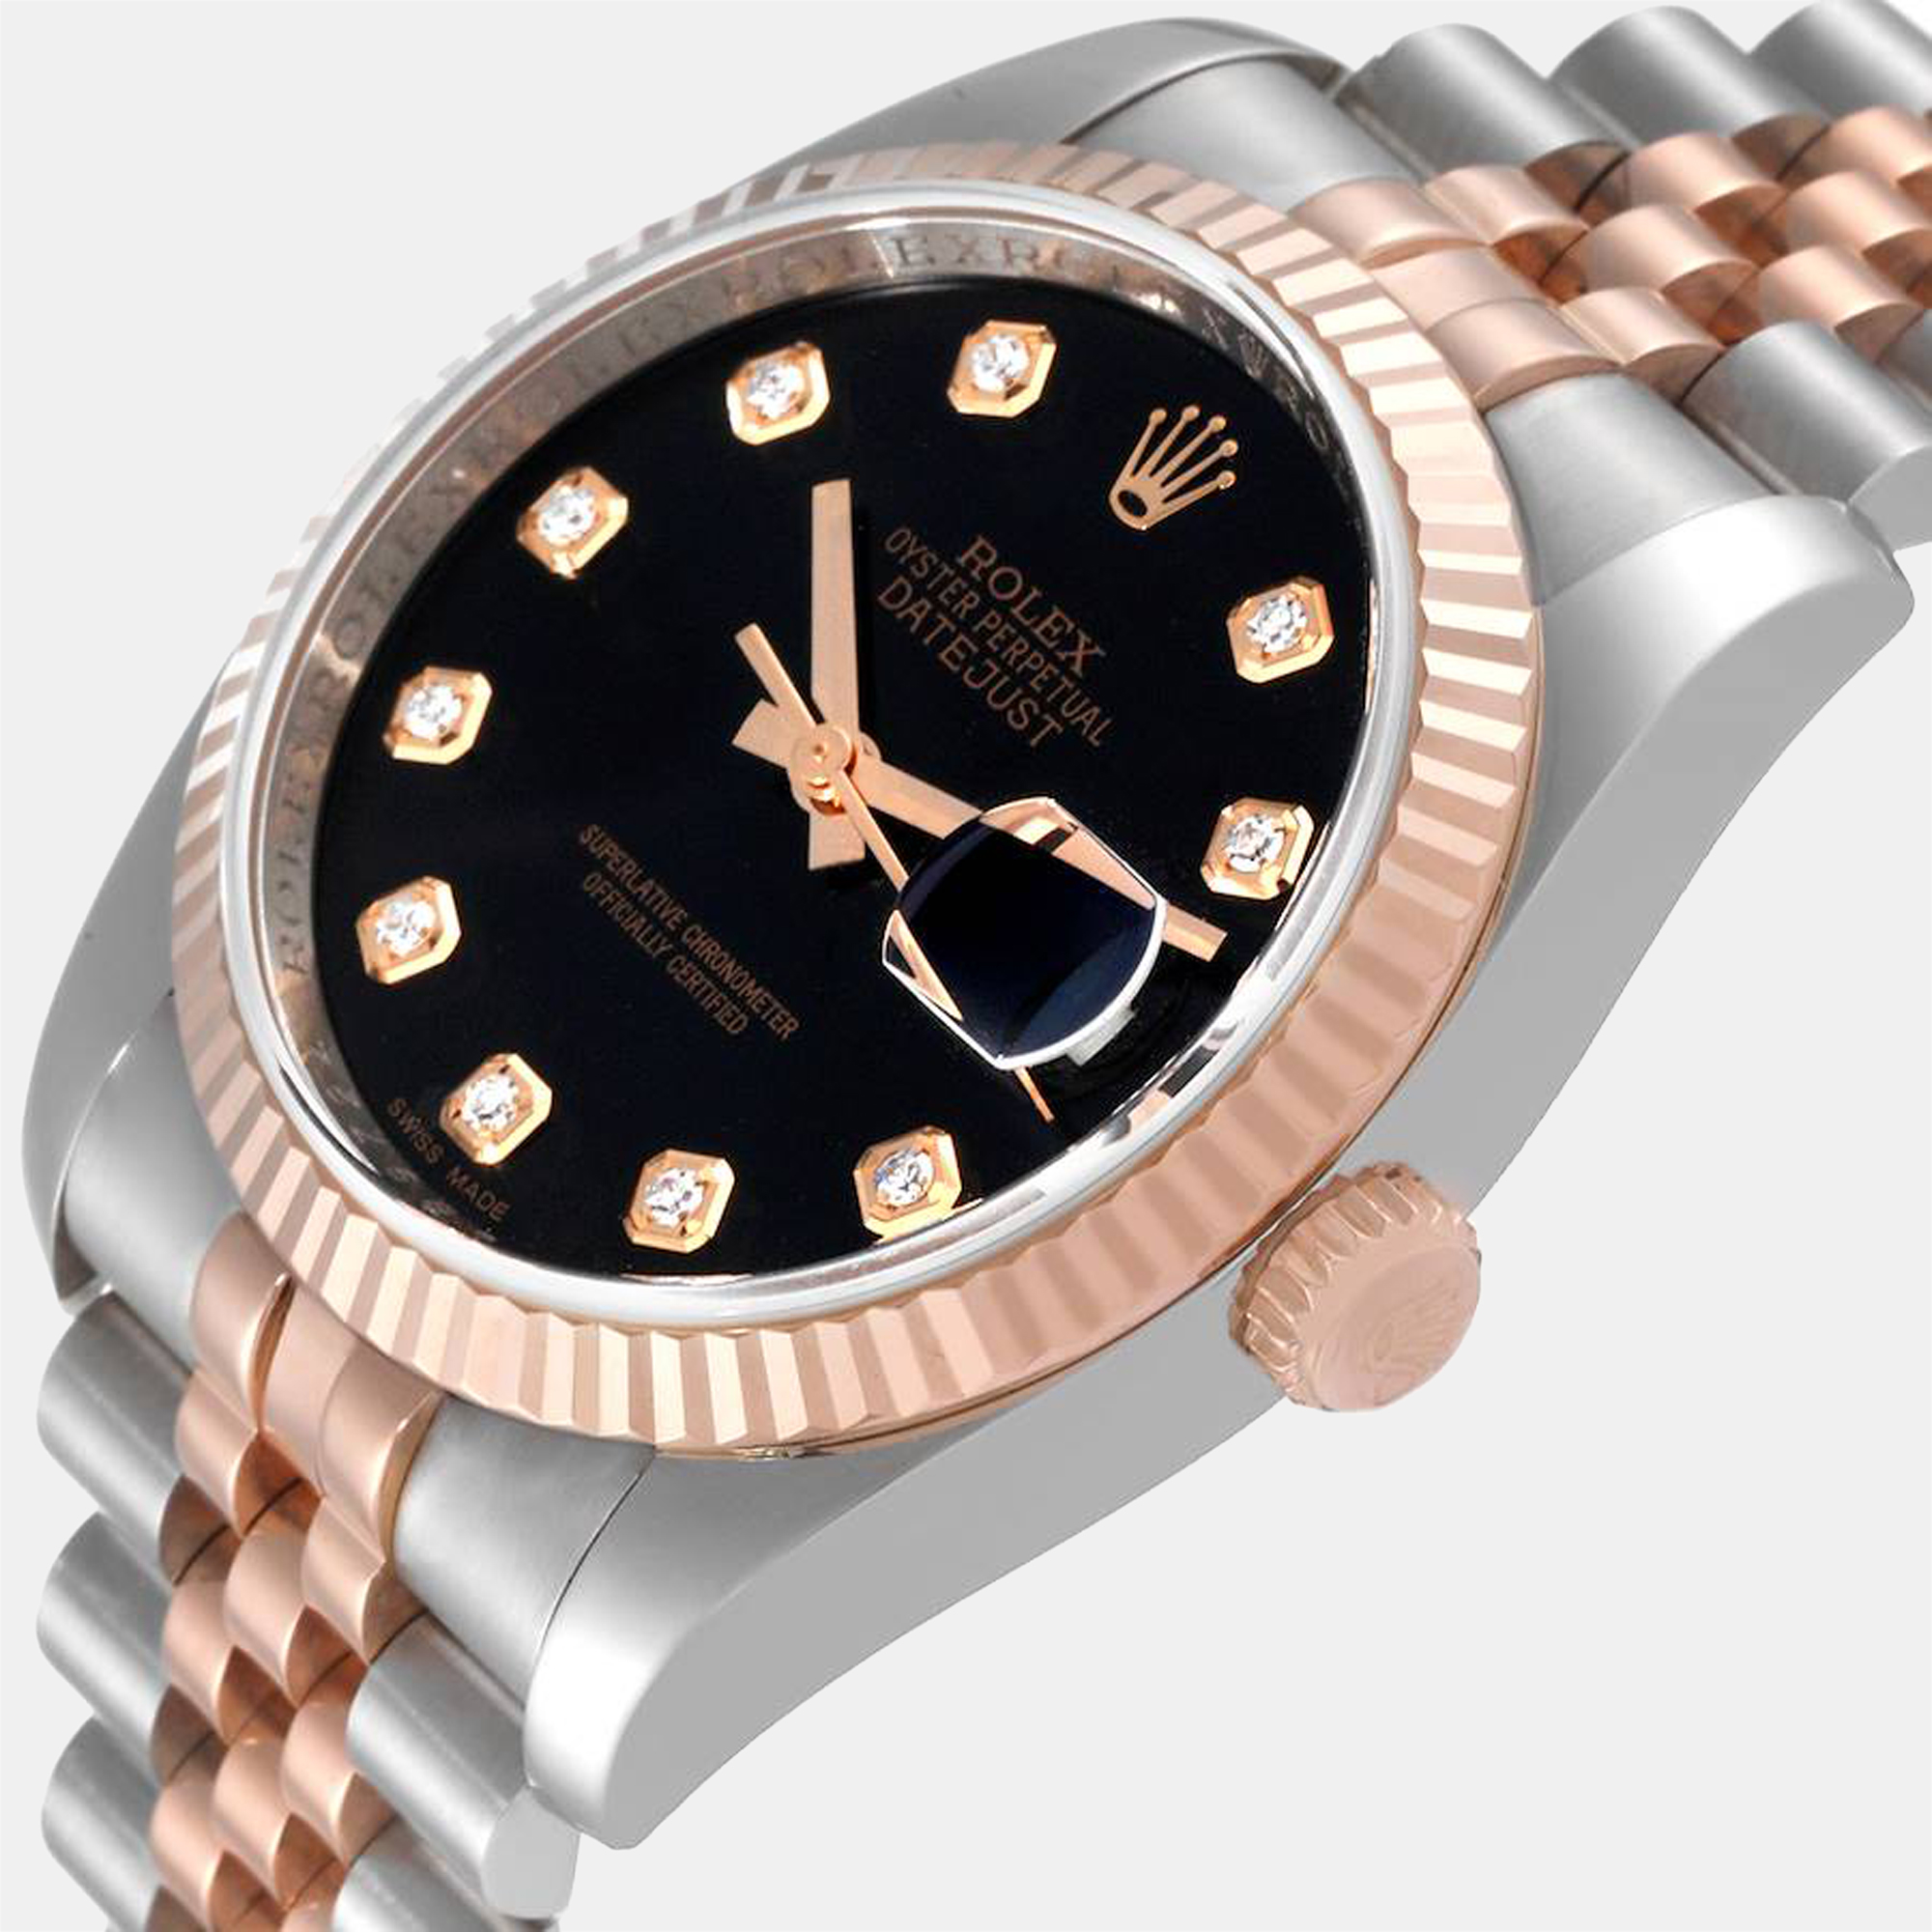 

Rolex Black Diamonds 18K Rose Gold And Stainless Steel Datejust 116231 Automatic Men's Wristwatch 36 mm